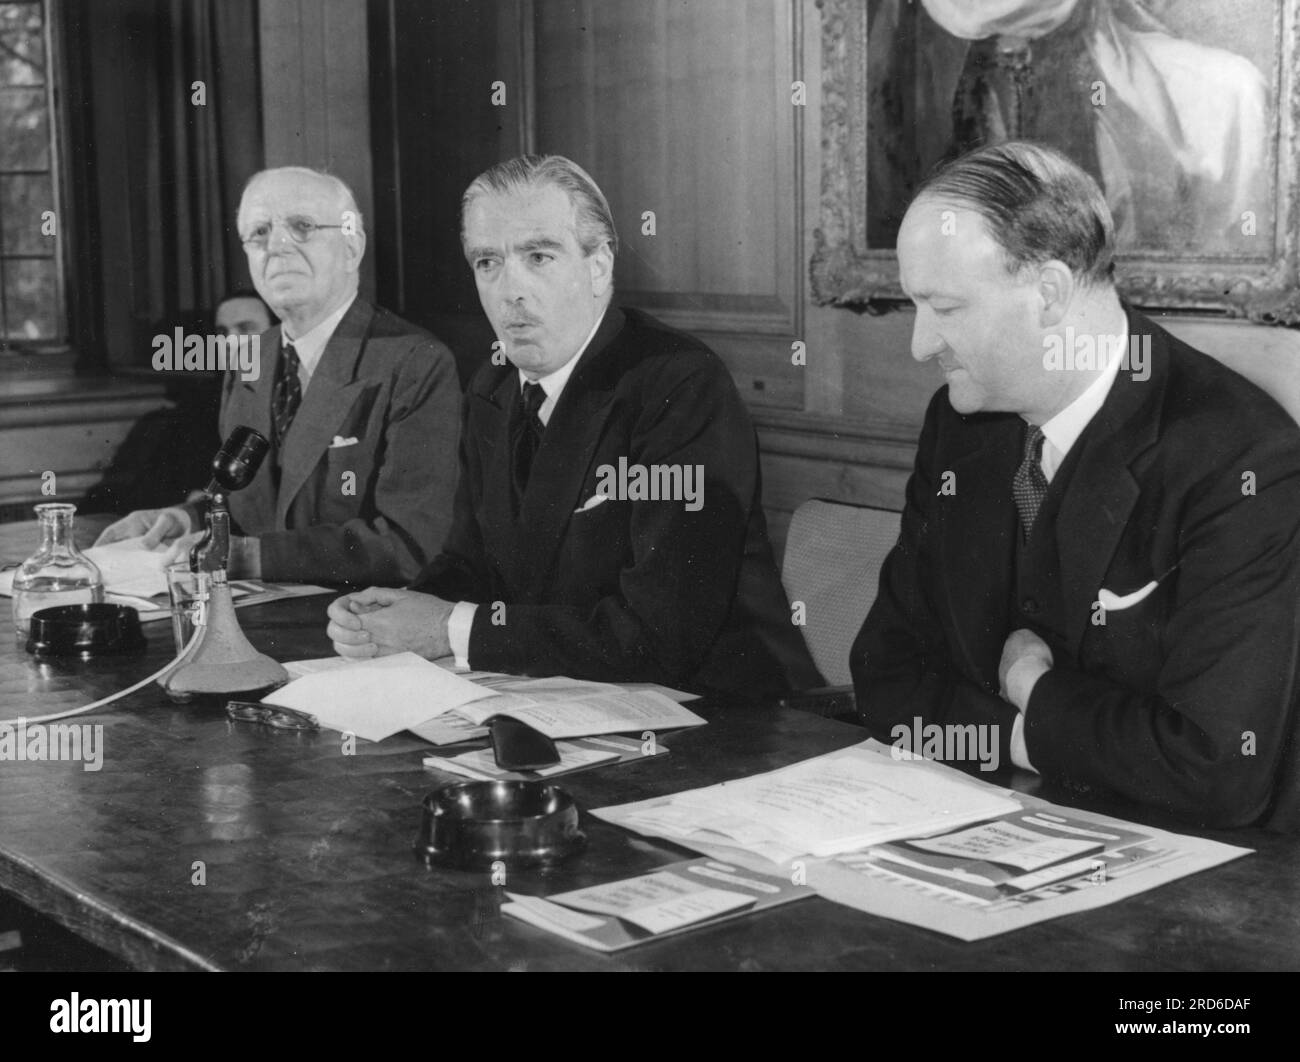 Eden, Anthony, 12.6.1897 - 14,1.1977, britischer Politiker (Cons. ), mit Lord Woolton, Rab Butler, ADDITIONAL-RIGHTS-CLEARANCE-INFO-NOT-AVAILABLE Stockfoto